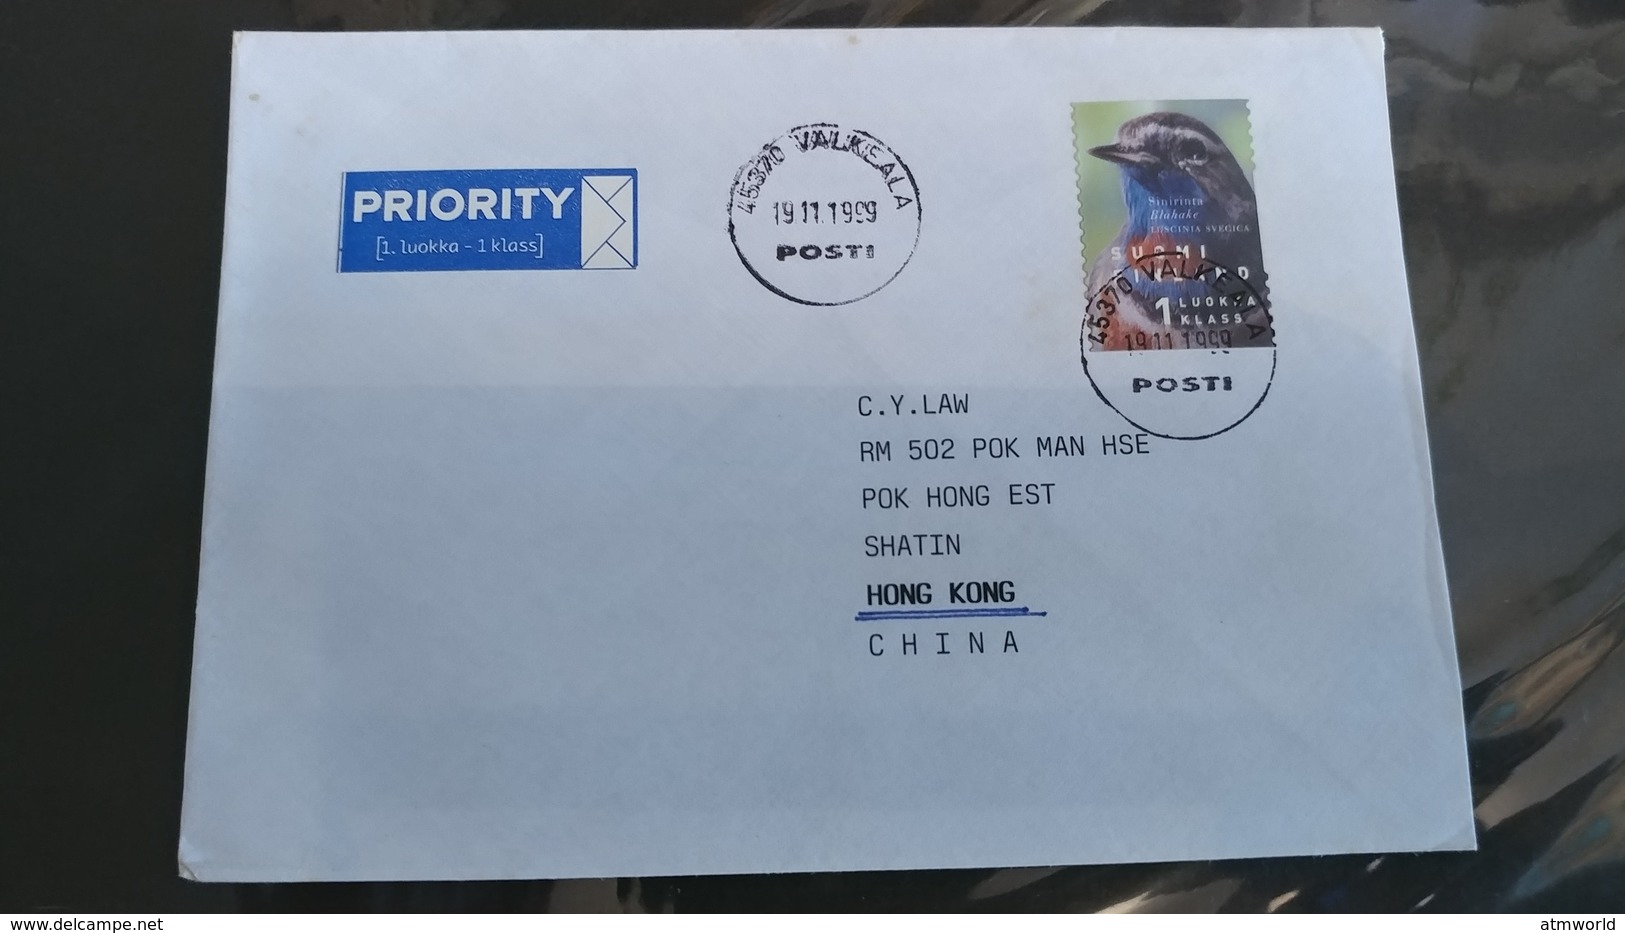 Postal Cover from Finland to Hong Kong